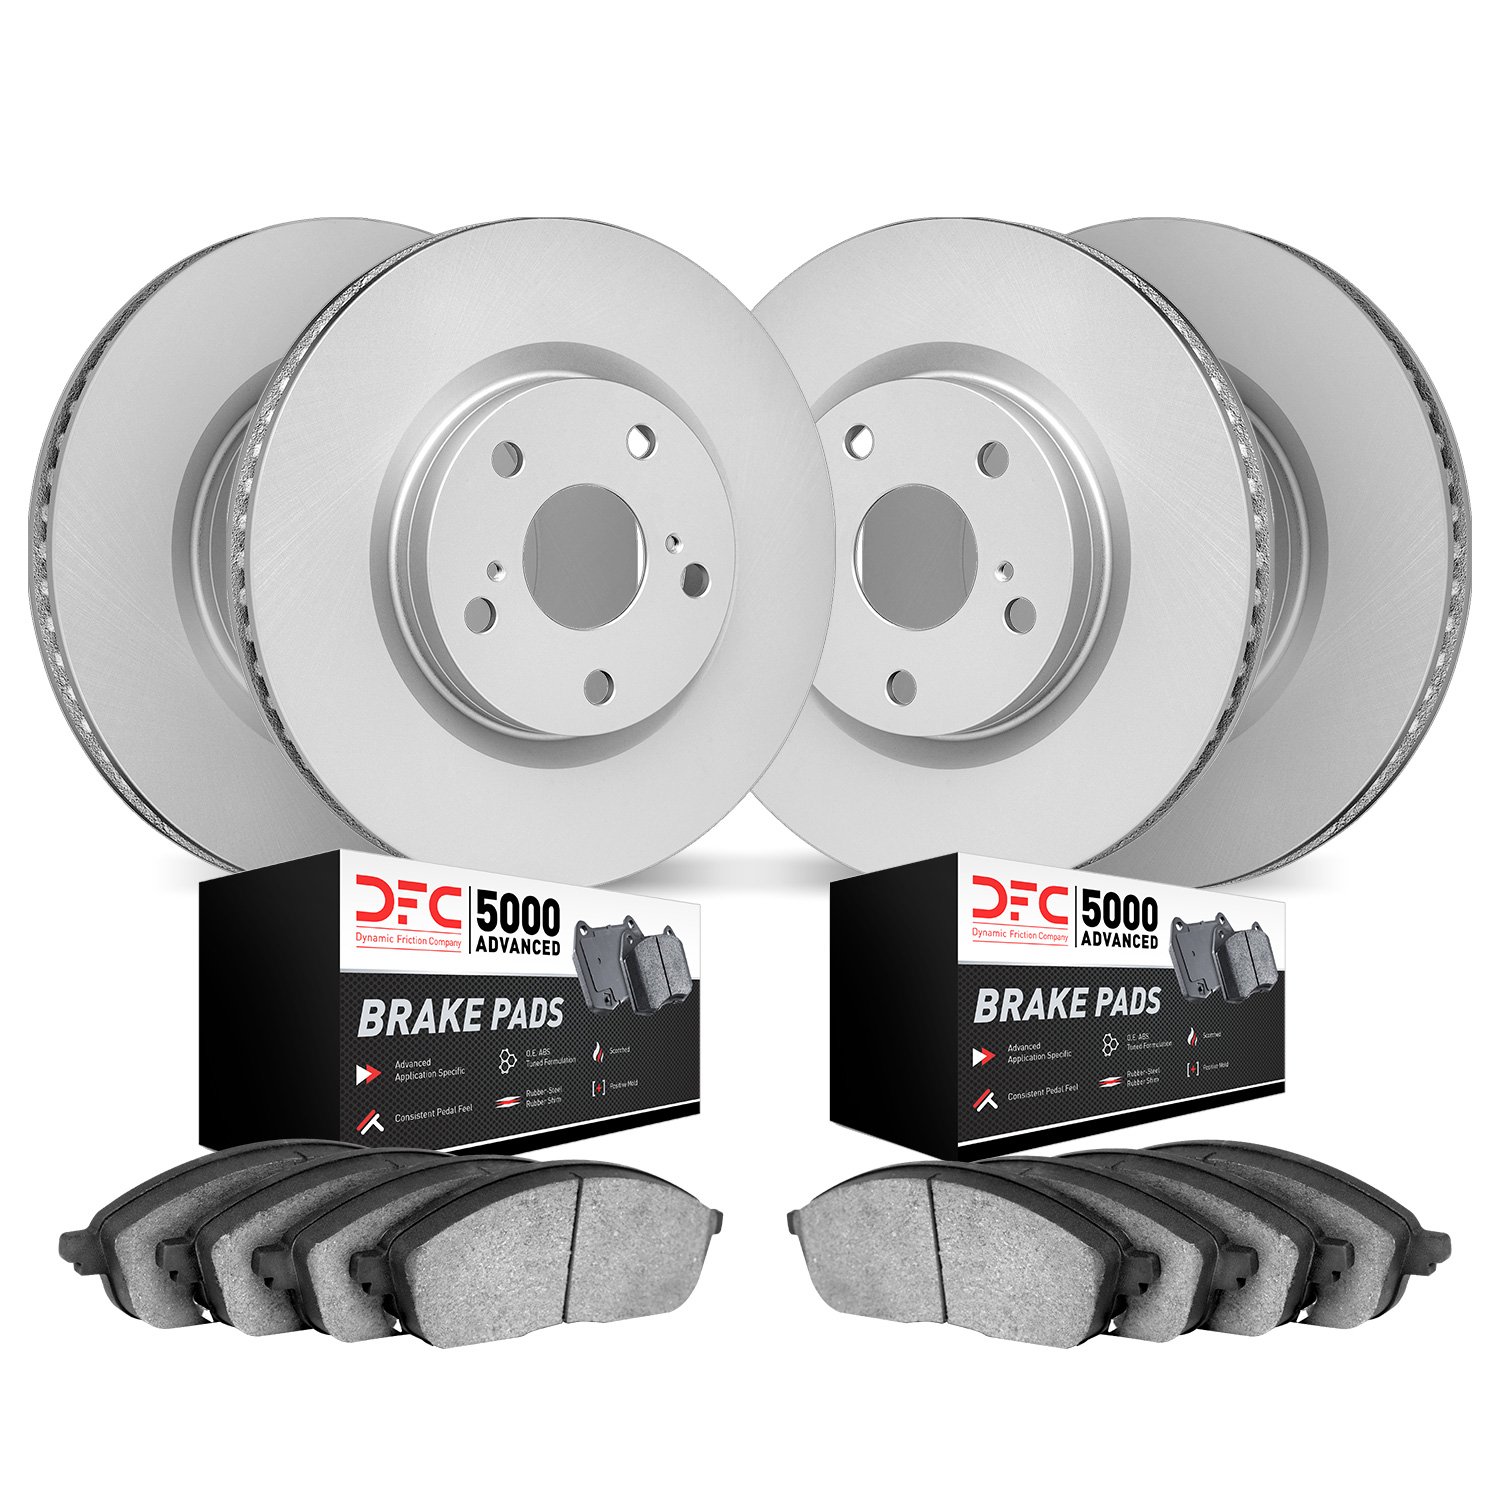 4504-11023 Geospec Brake Rotors w/5000 Advanced Brake Pads Kit, Fits Select Land Rover, Position: Front and Rear